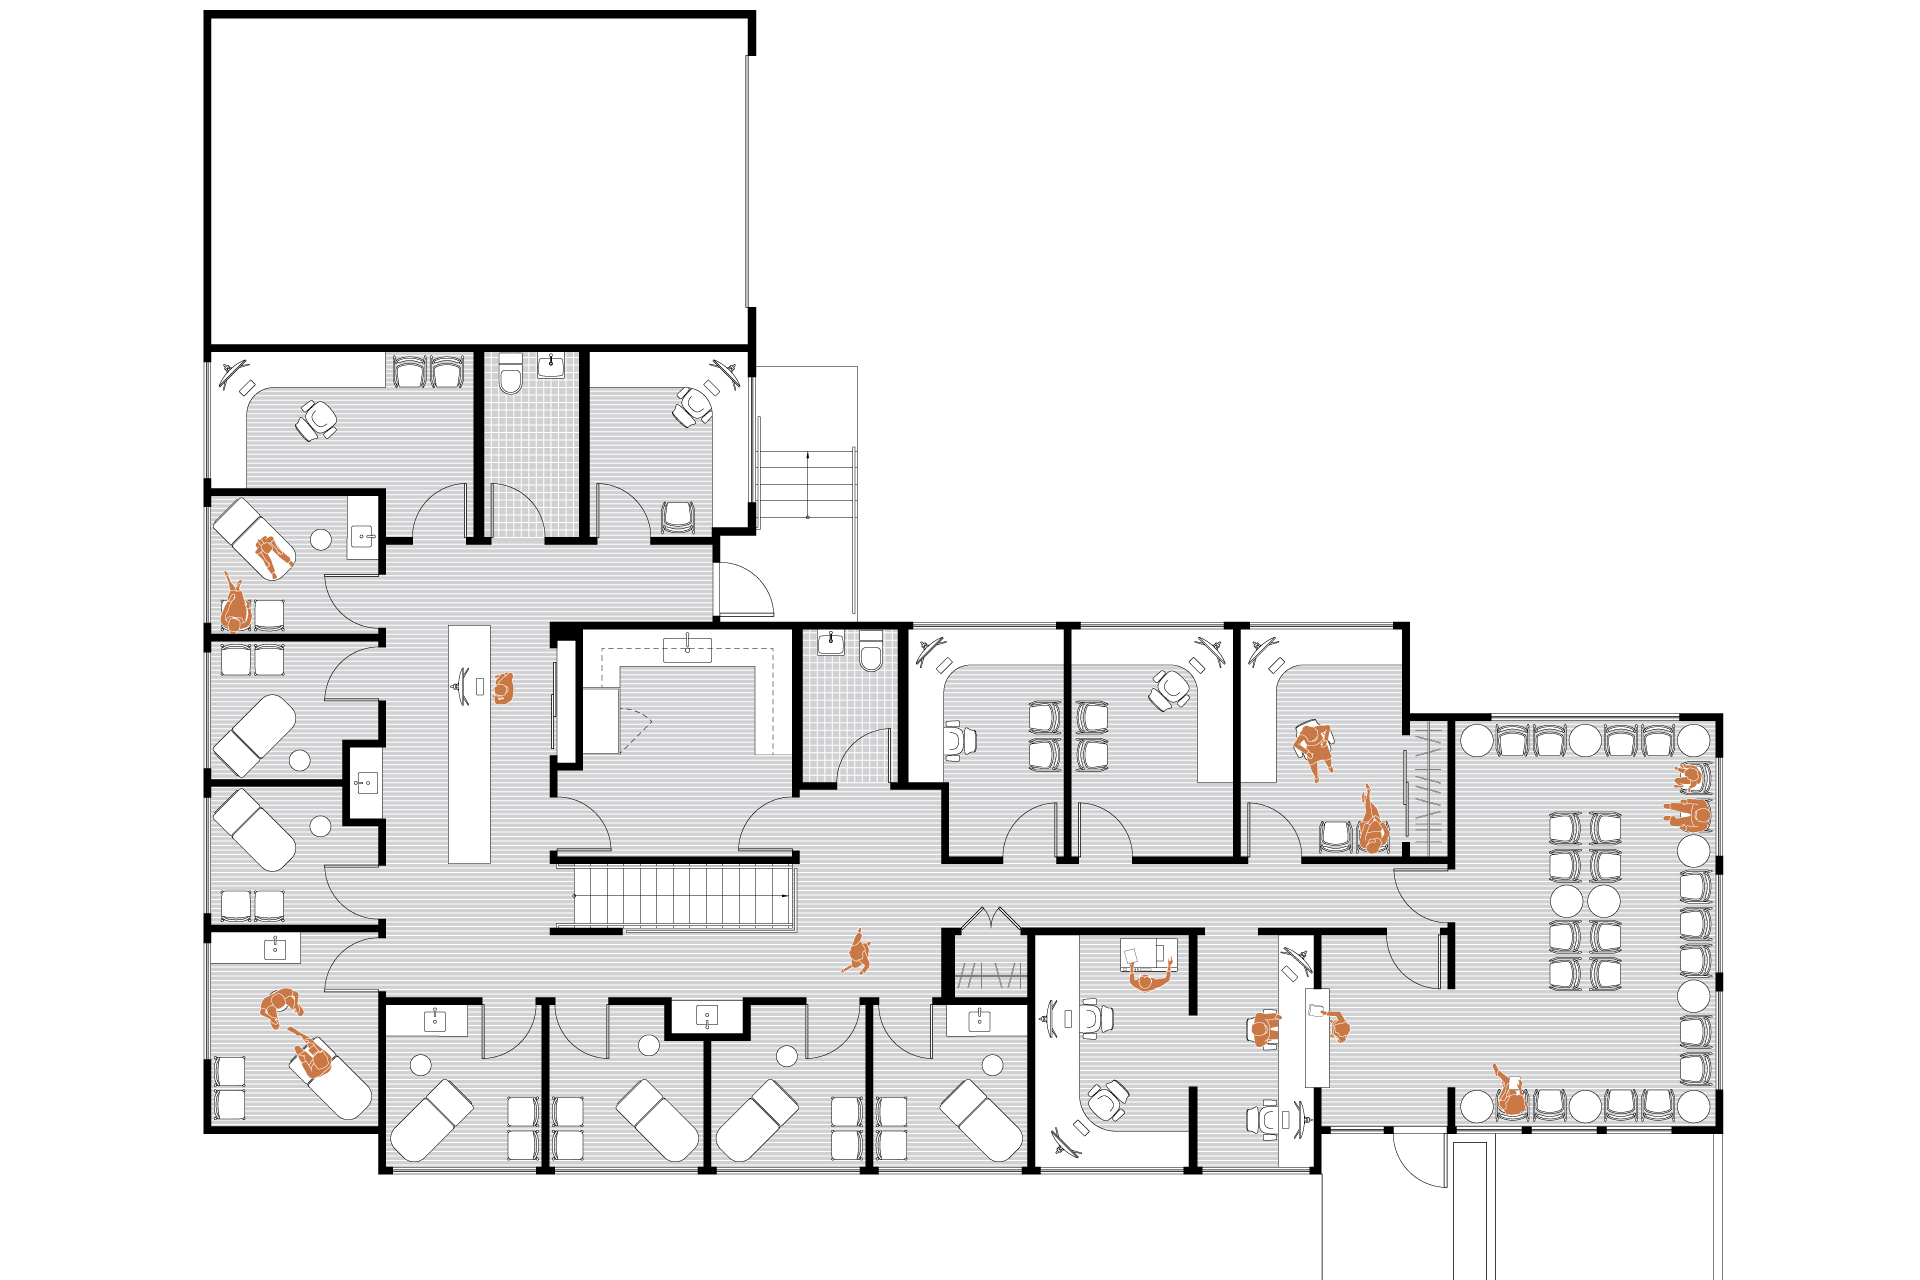 This is a floor plan drawing of the Gateway Medical Clinic after being renovated.